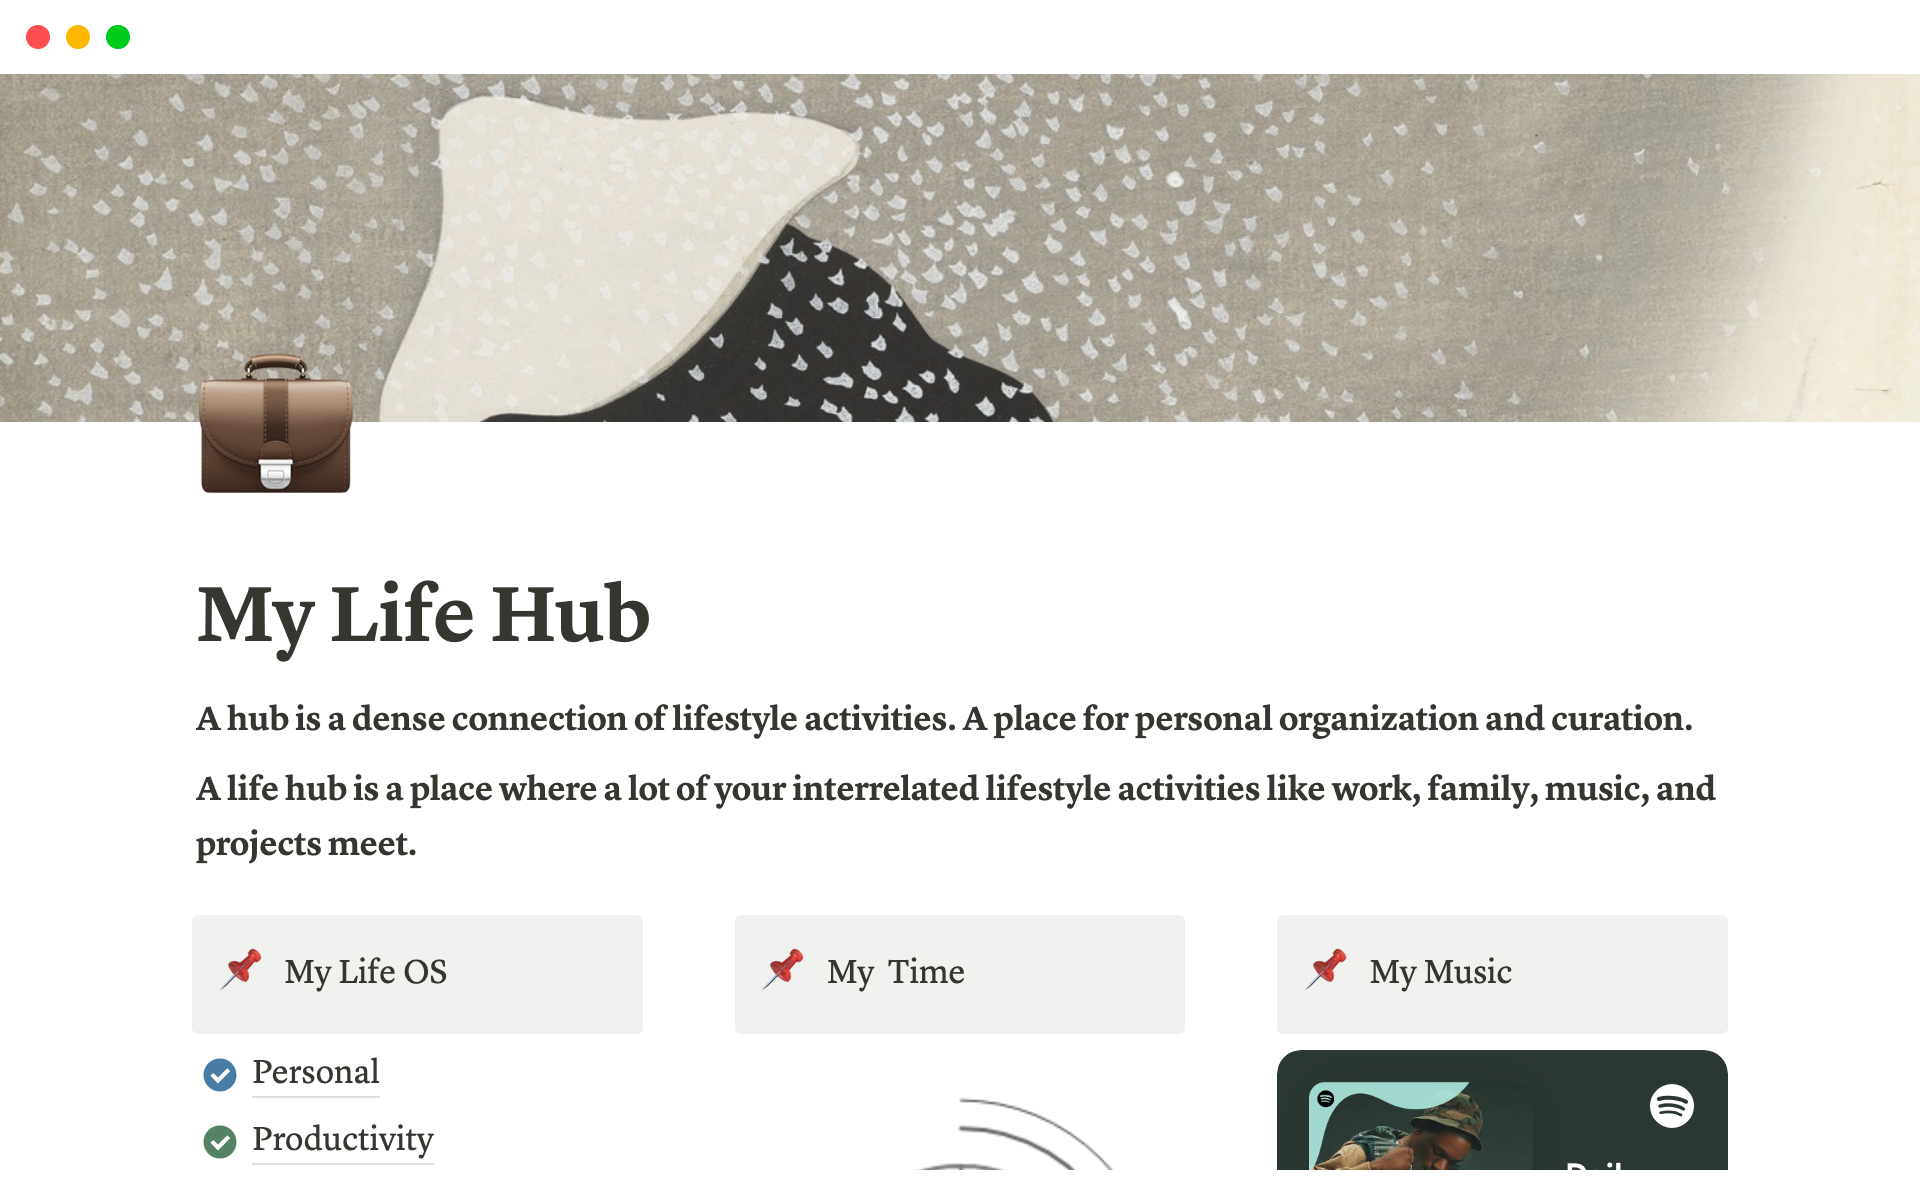 A life hub is a place where a lot of your interrelated lifestyle activities like work, family, music, and projects meet.